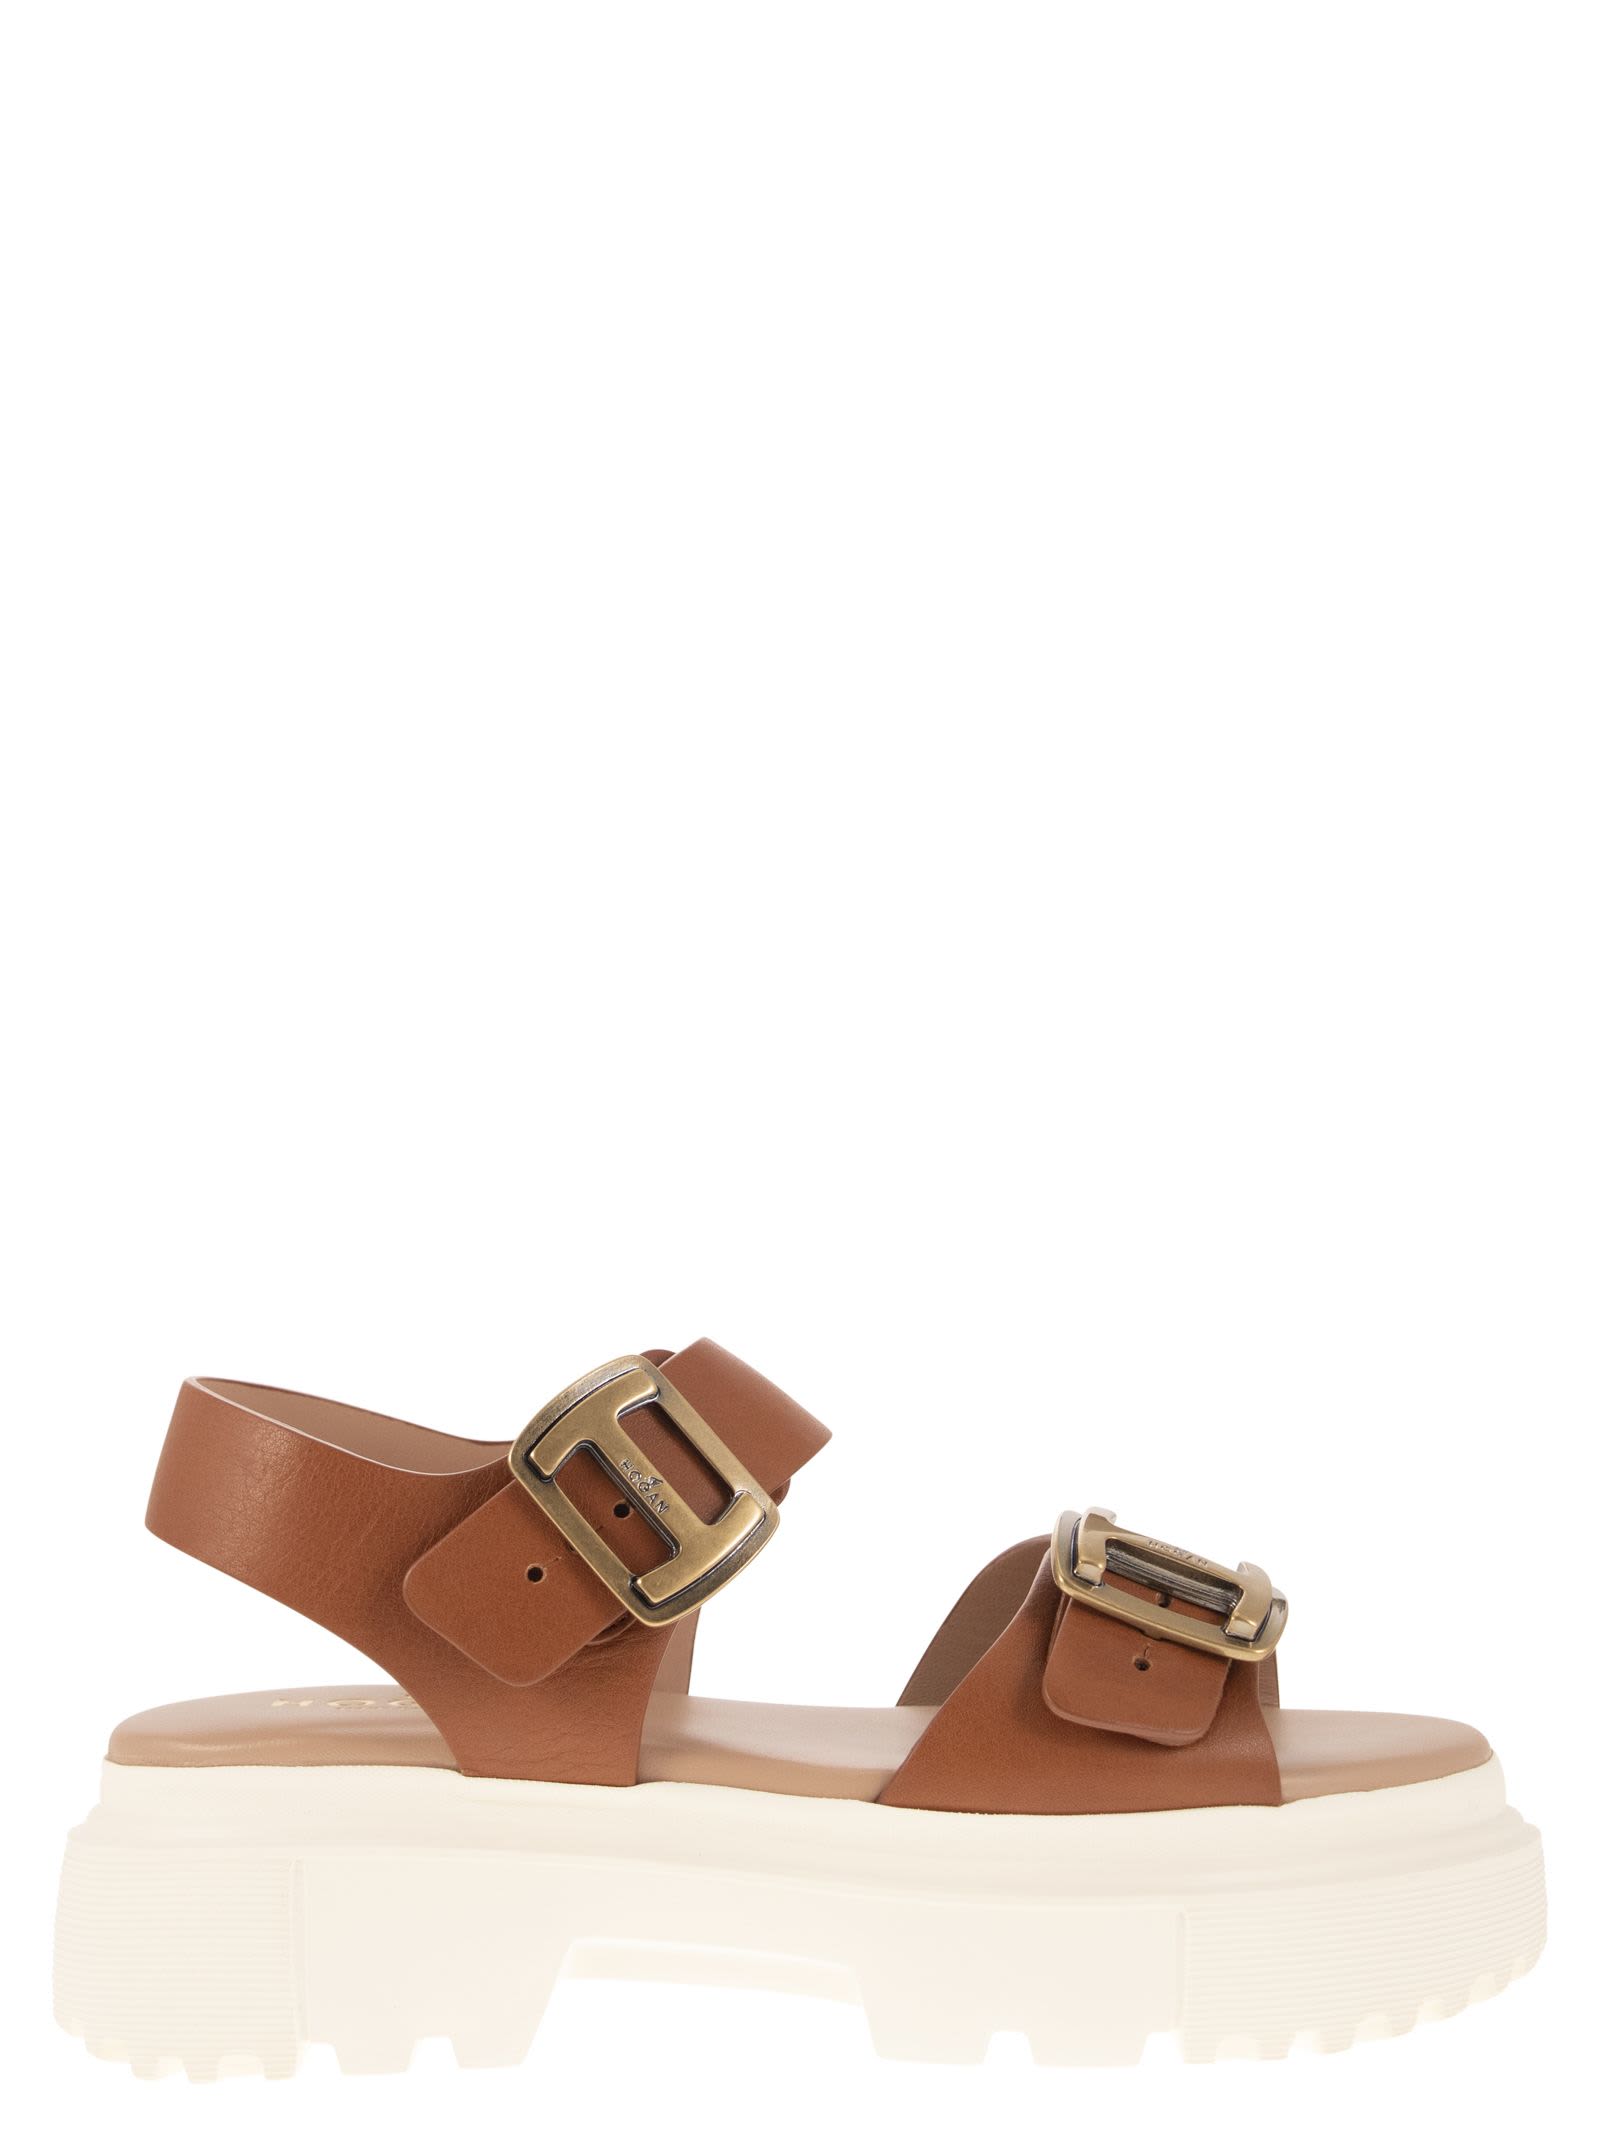 HOGAN H644 - SANDAL WITH TWO BUCKLES